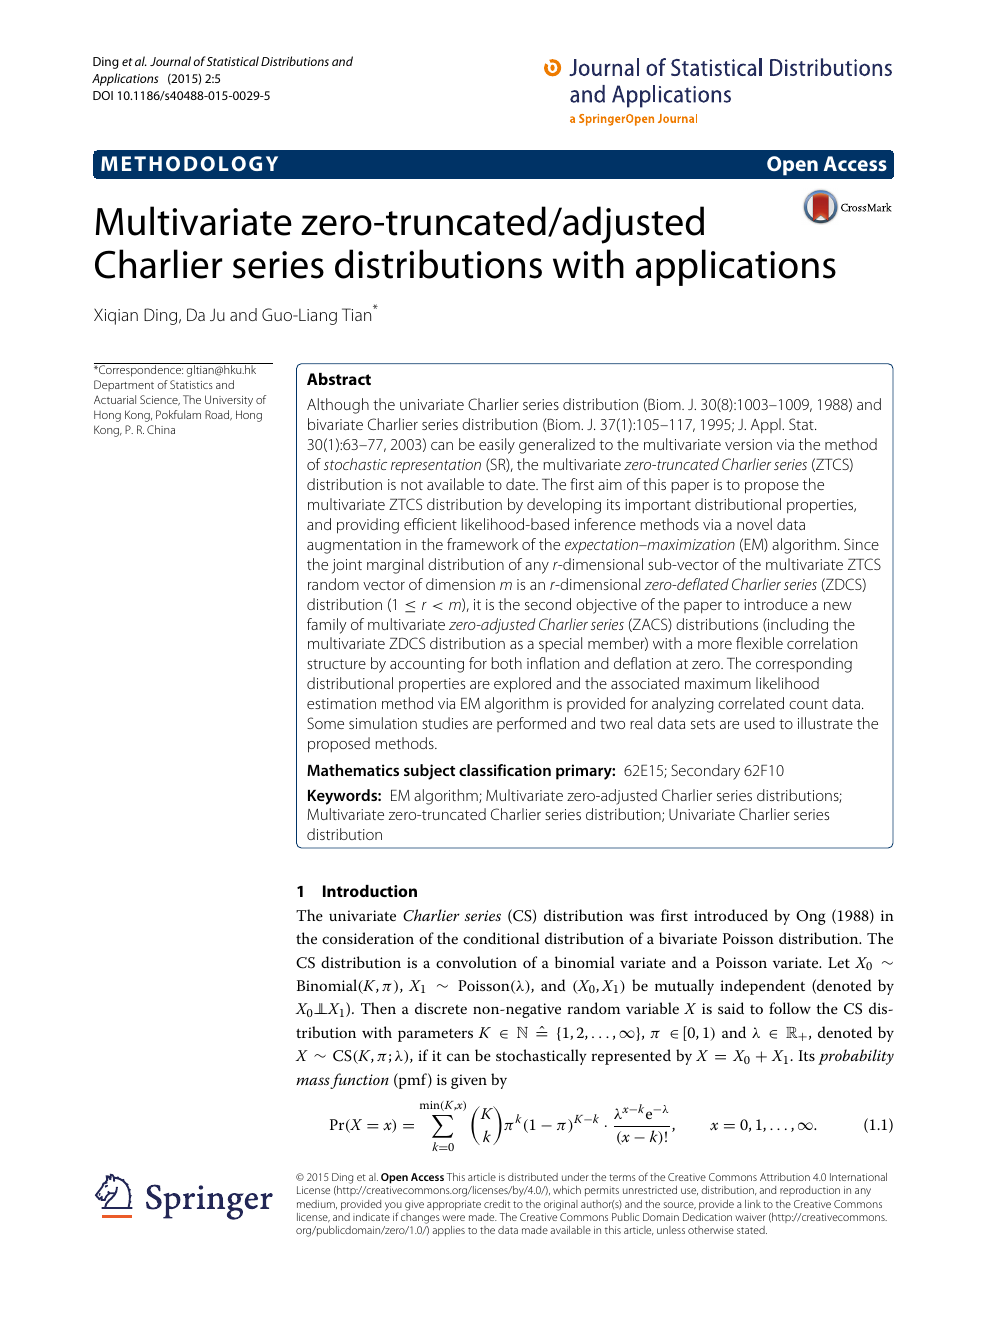 Multivariate Zero Truncated Adjusted Charlier Series Distributions With Applications Topic Of Research Paper In Mathematics Download Scholarly Article Pdf And Read For Free On Cyberleninka Open Science Hub